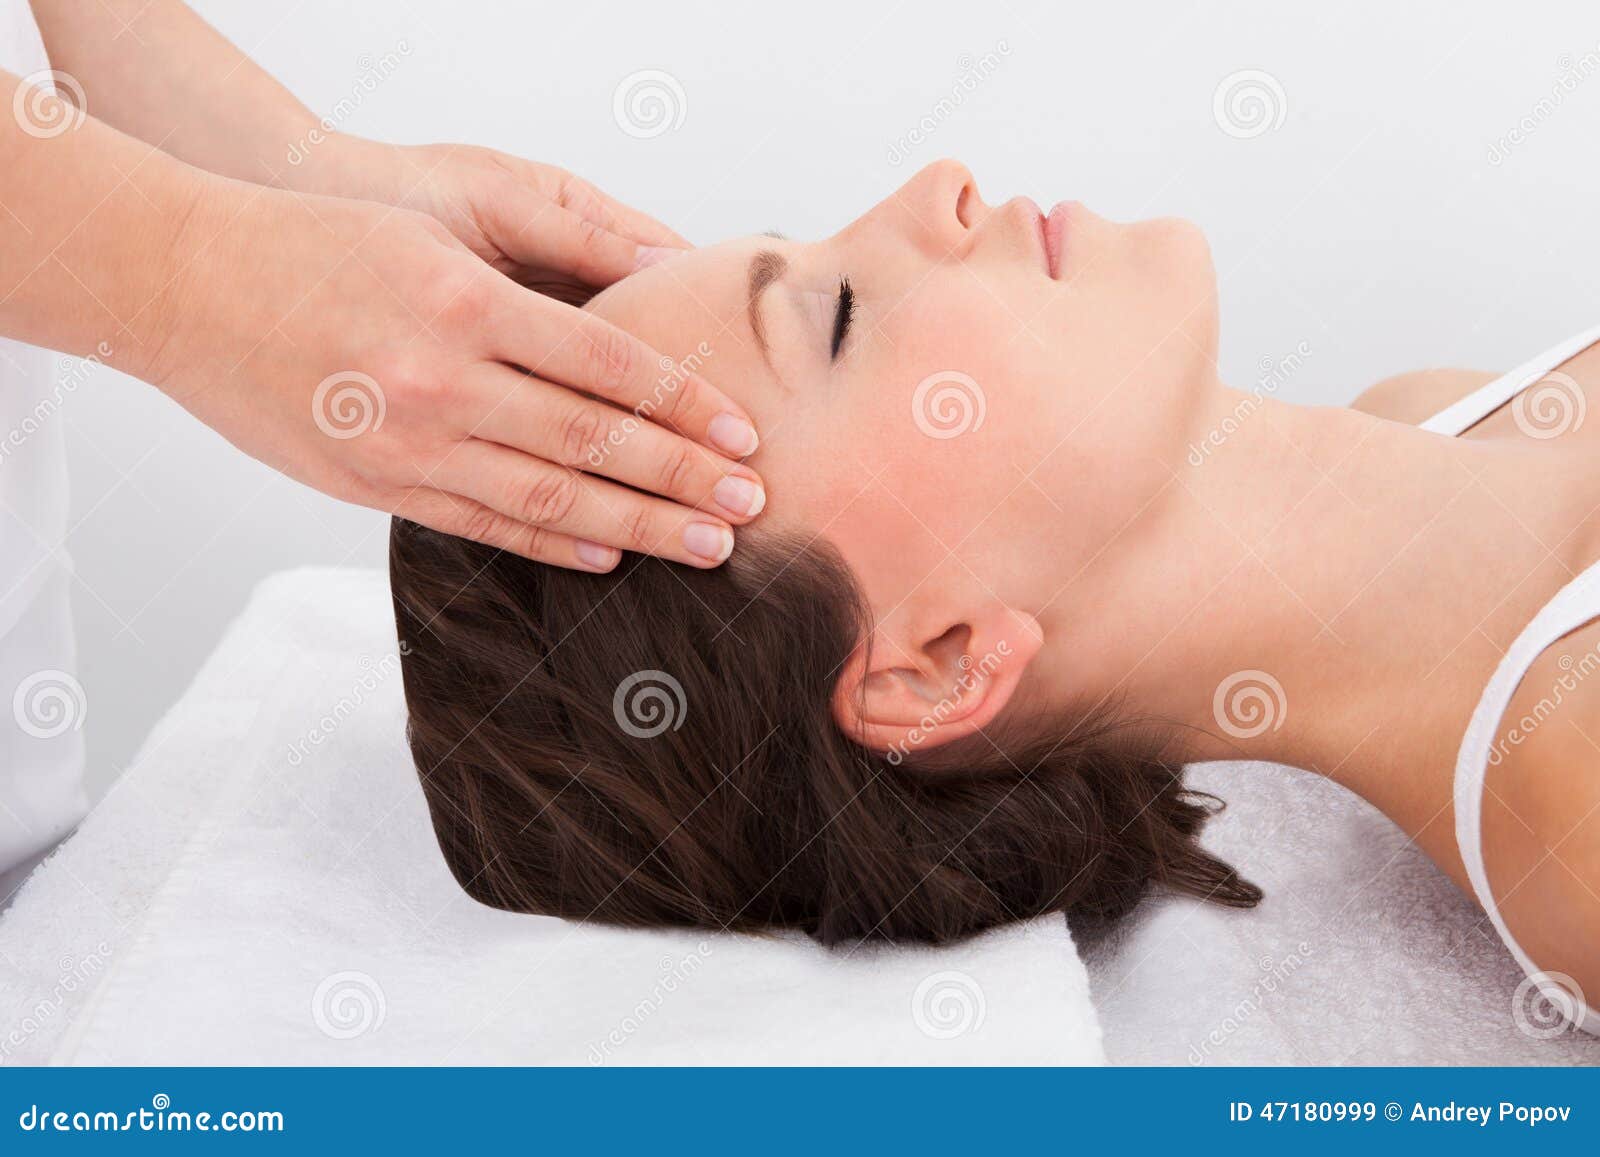 Woman Getting Massage Treatment Stock Image Image Of Lady Care 47180999